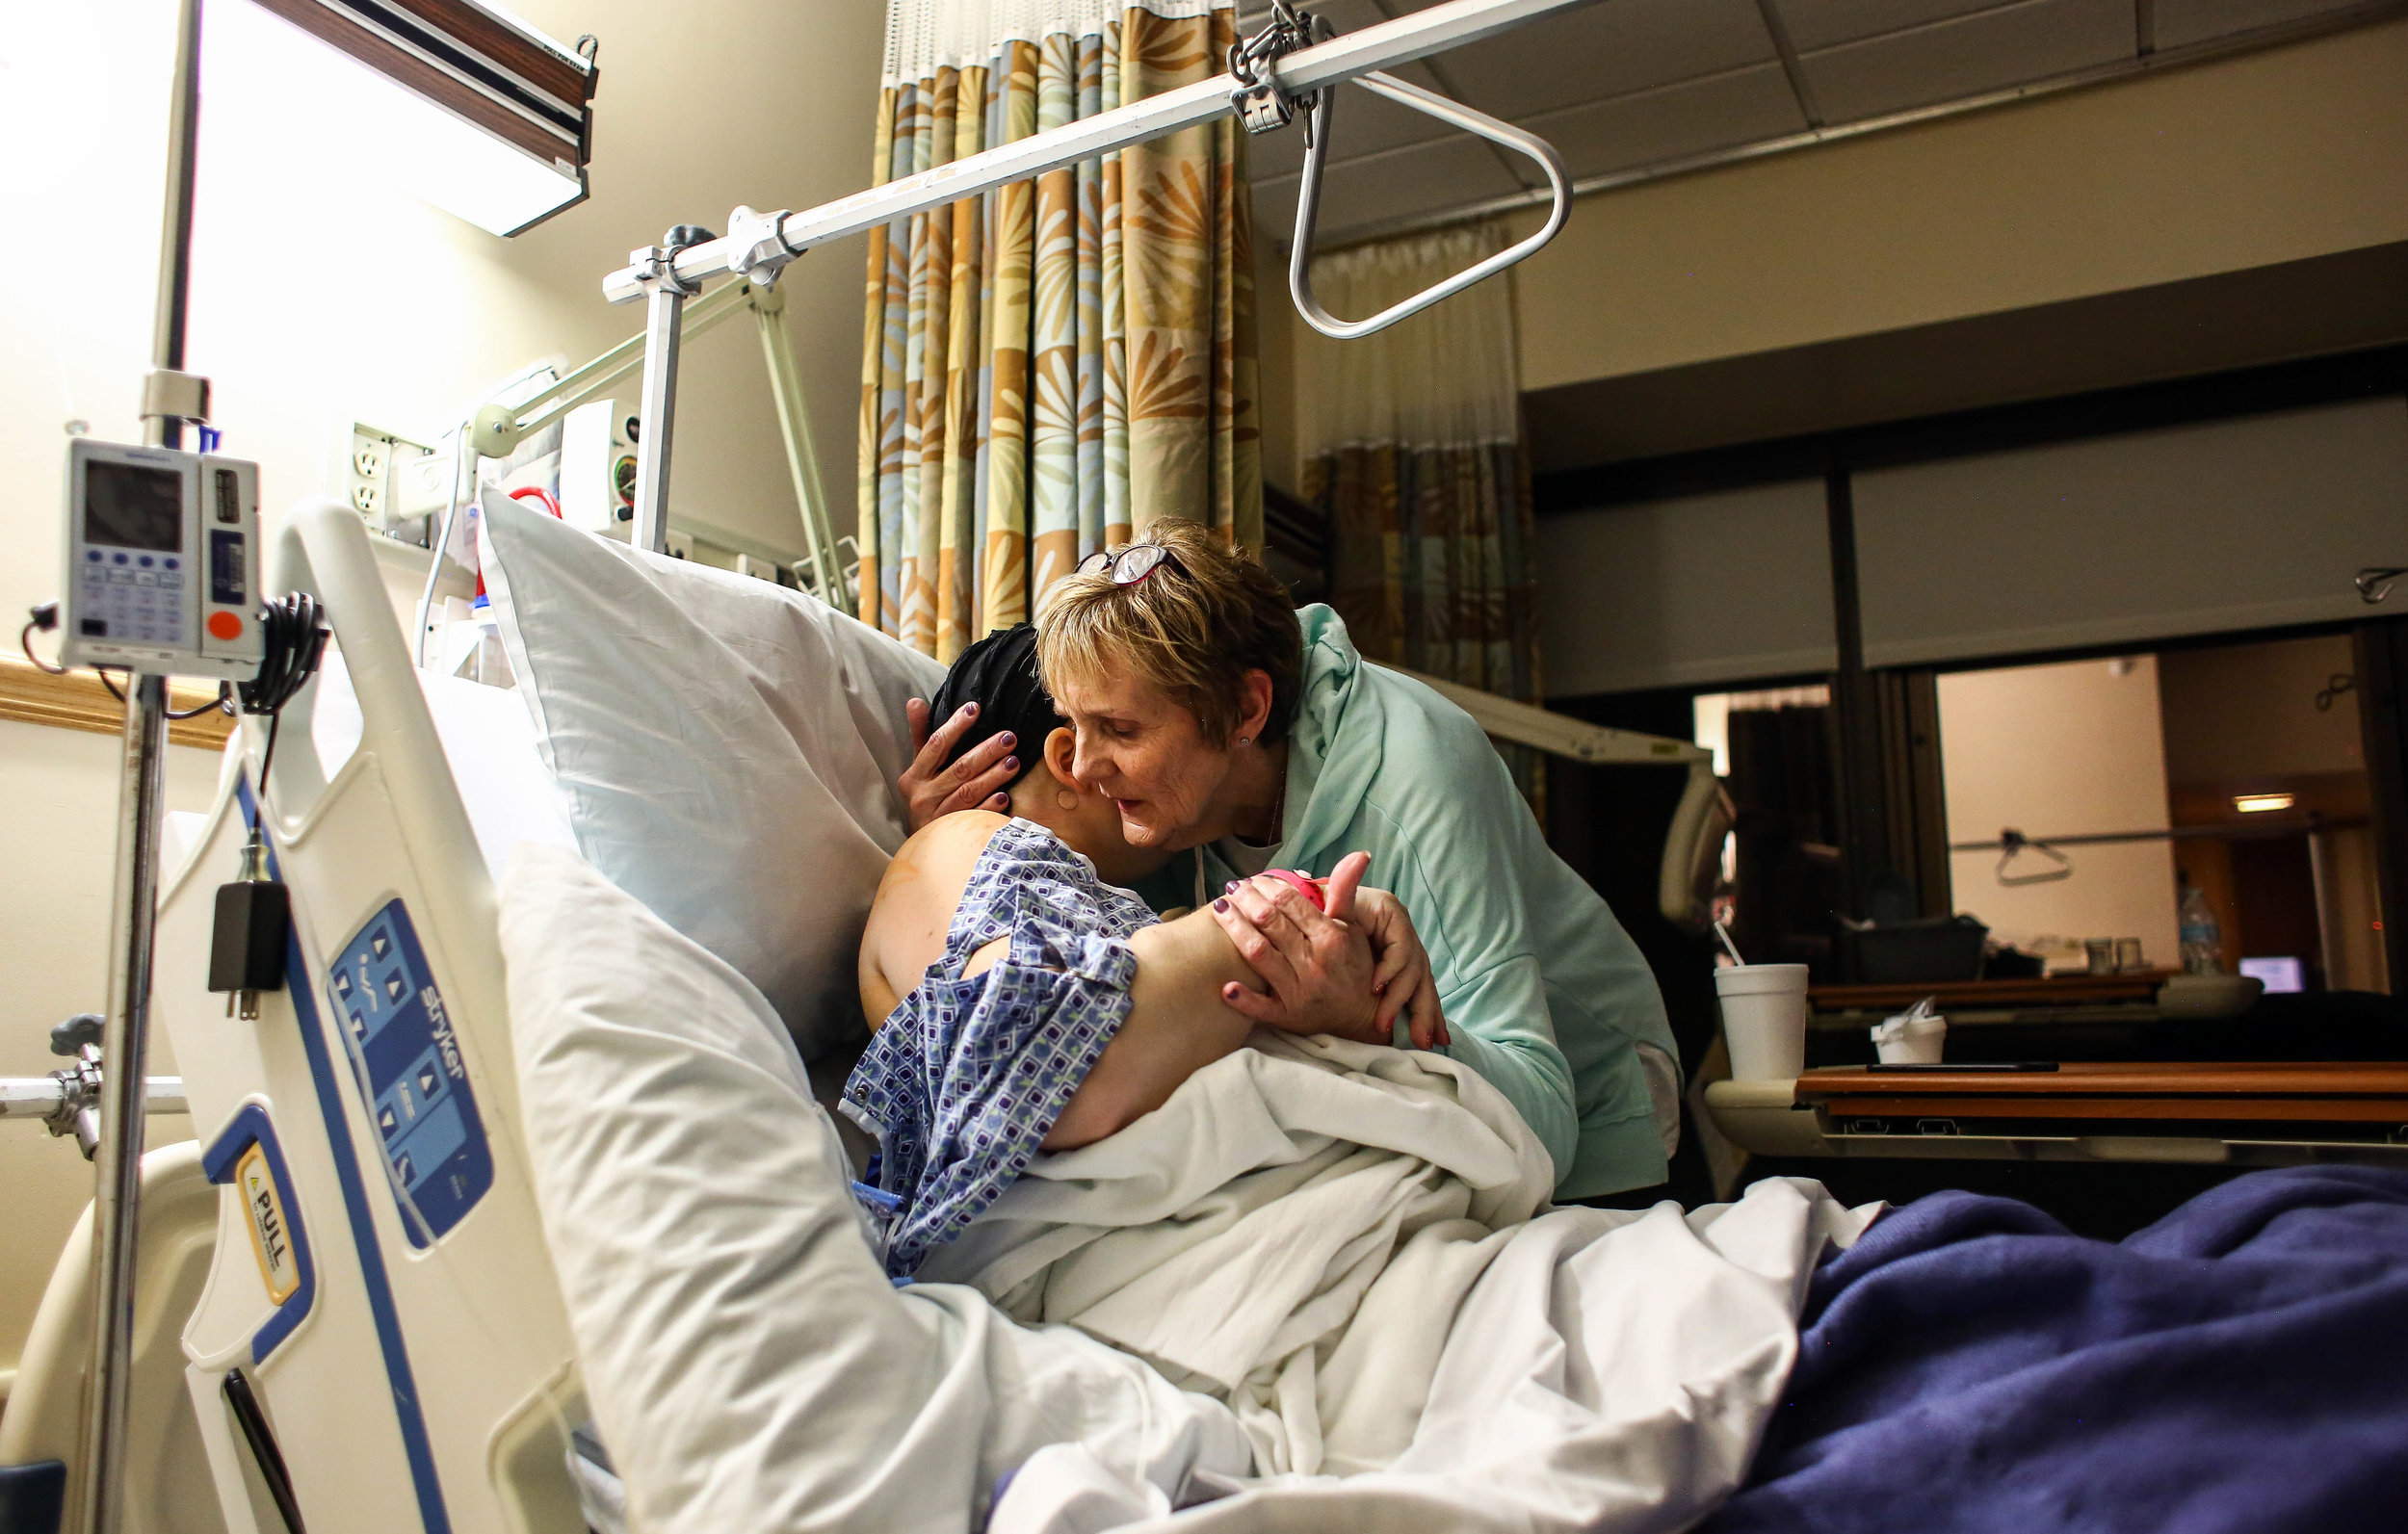  Janet Wegner hugs her daughter Amanda Cihak after her double mastectomy surgery at the Mercy Health Hackley Campus in Muskegon, Michigan on Thursday, March 14, 2019. Wegner is a stage 3 breast cancer survivor; it pains her to see her daughter go thr